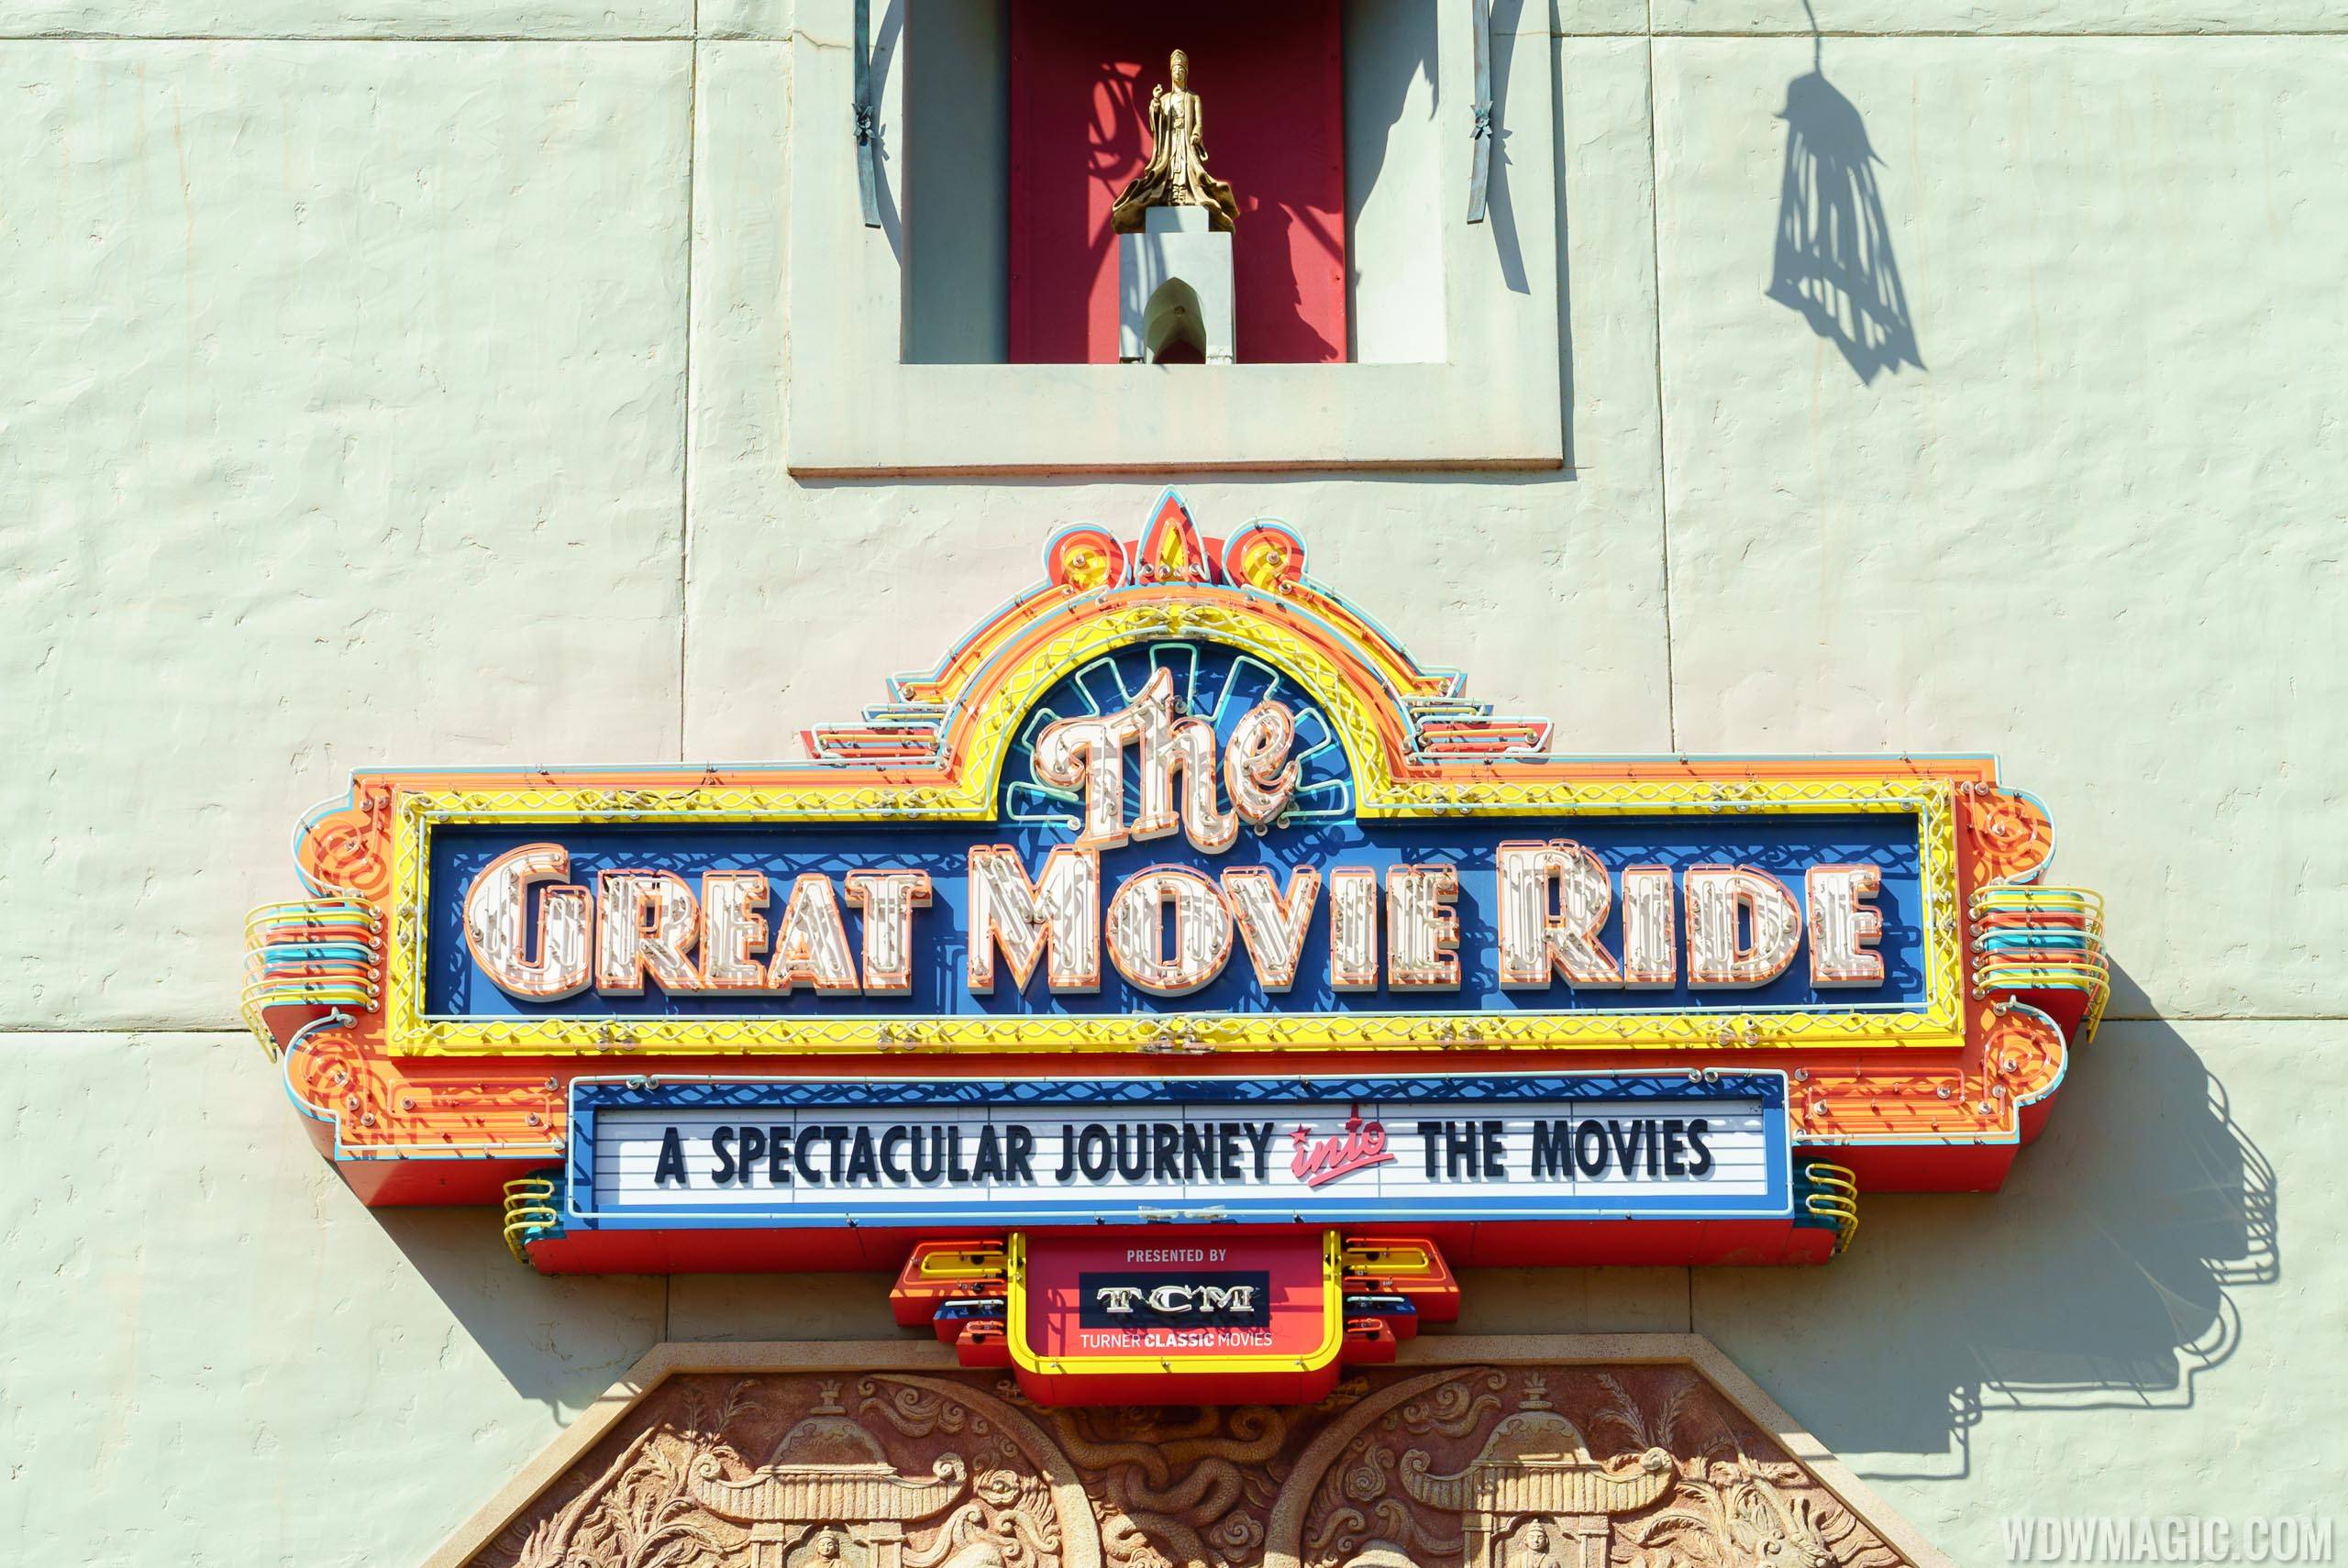 Complete tour of The Great Movie Ride